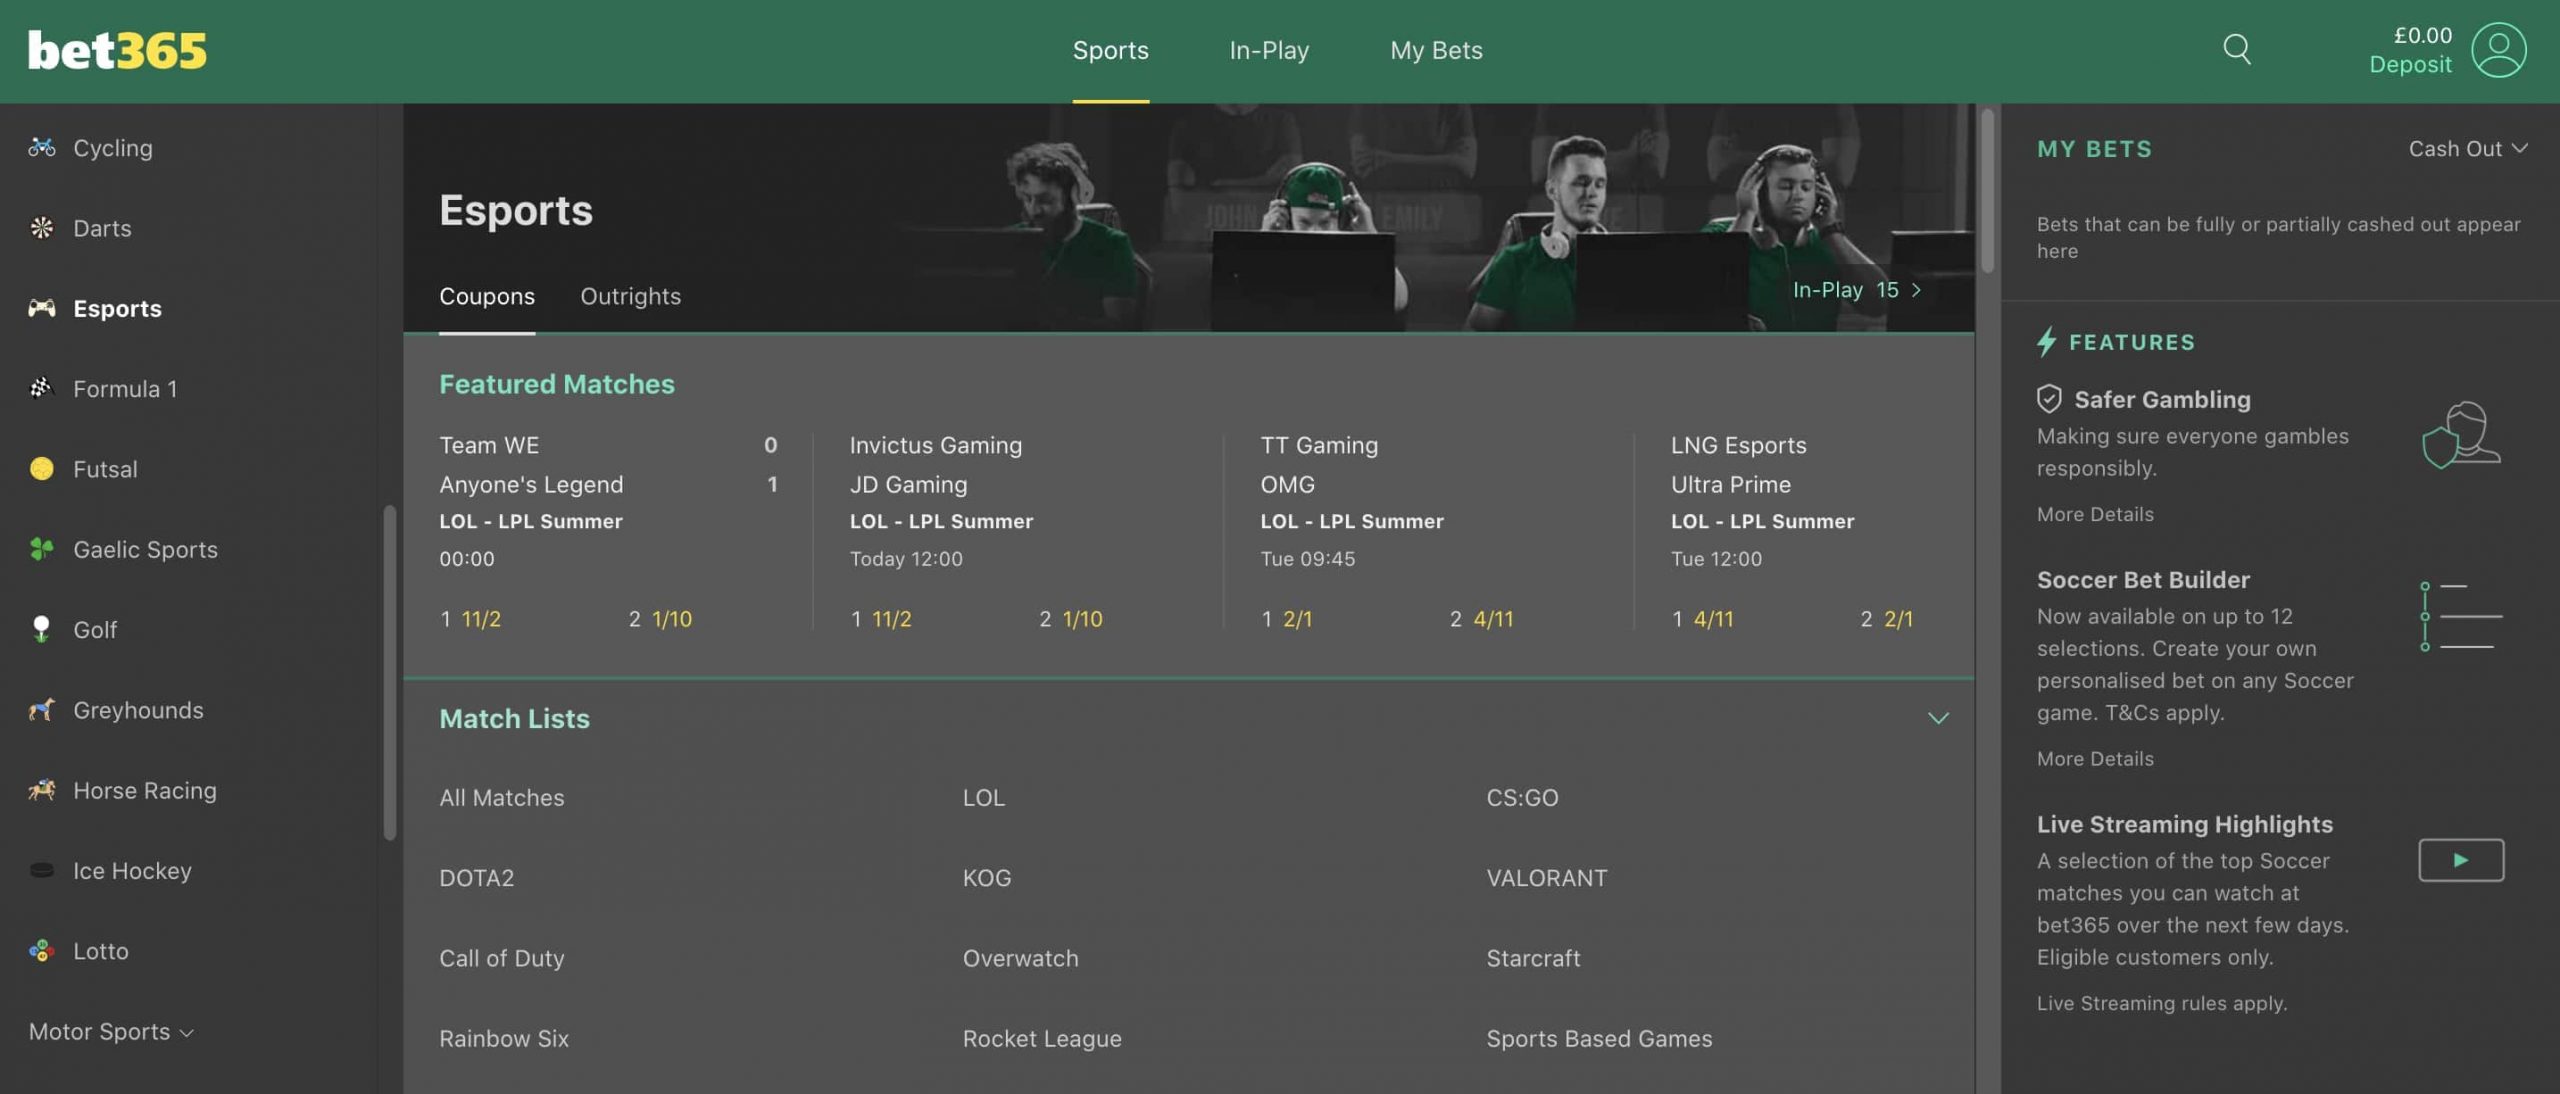 bet365 eSports page